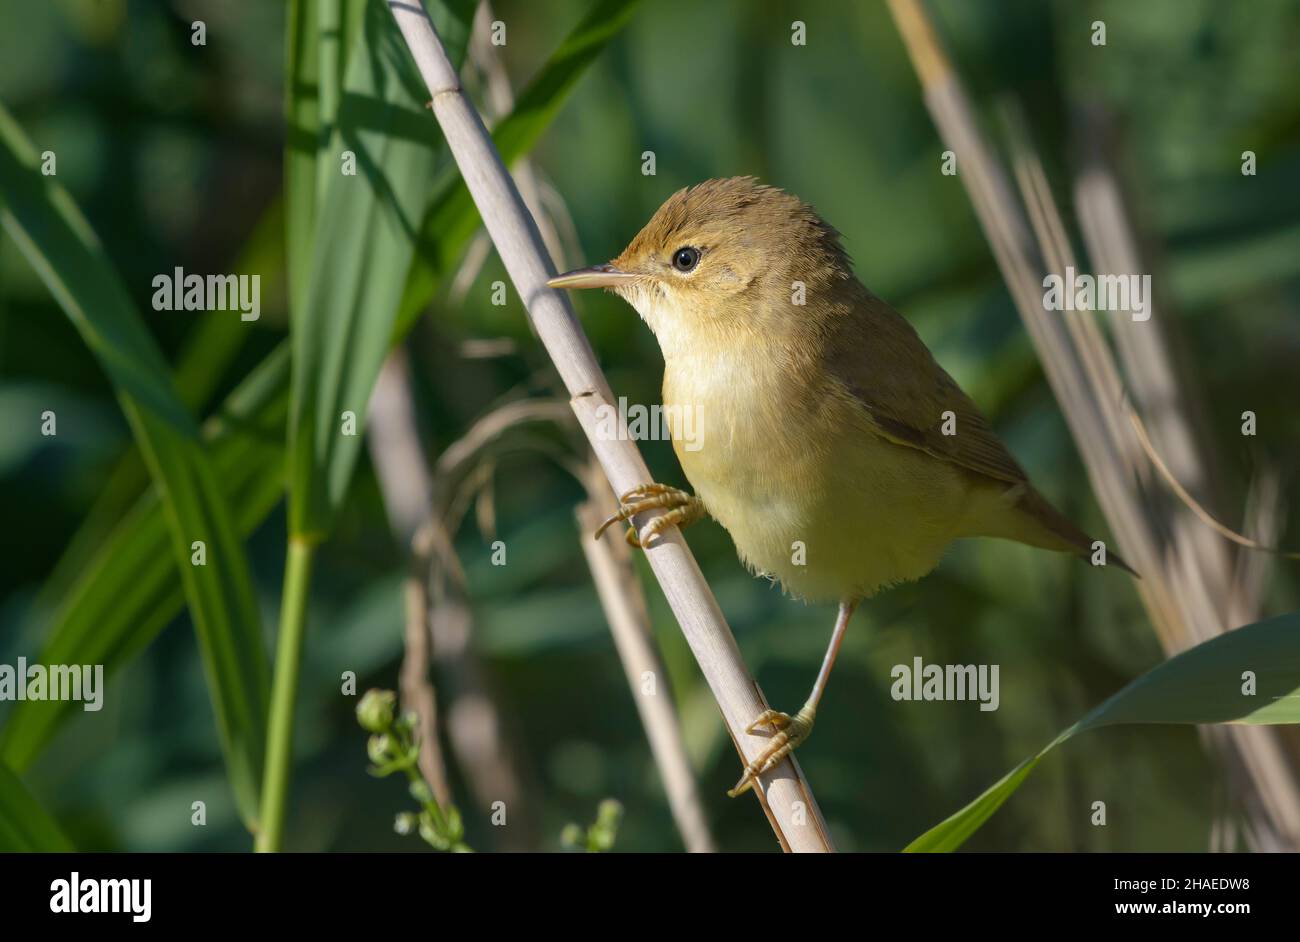 Young Marsh Warbler (Acrocephalus palustris) posing on reed stems in bushes Stock Photo